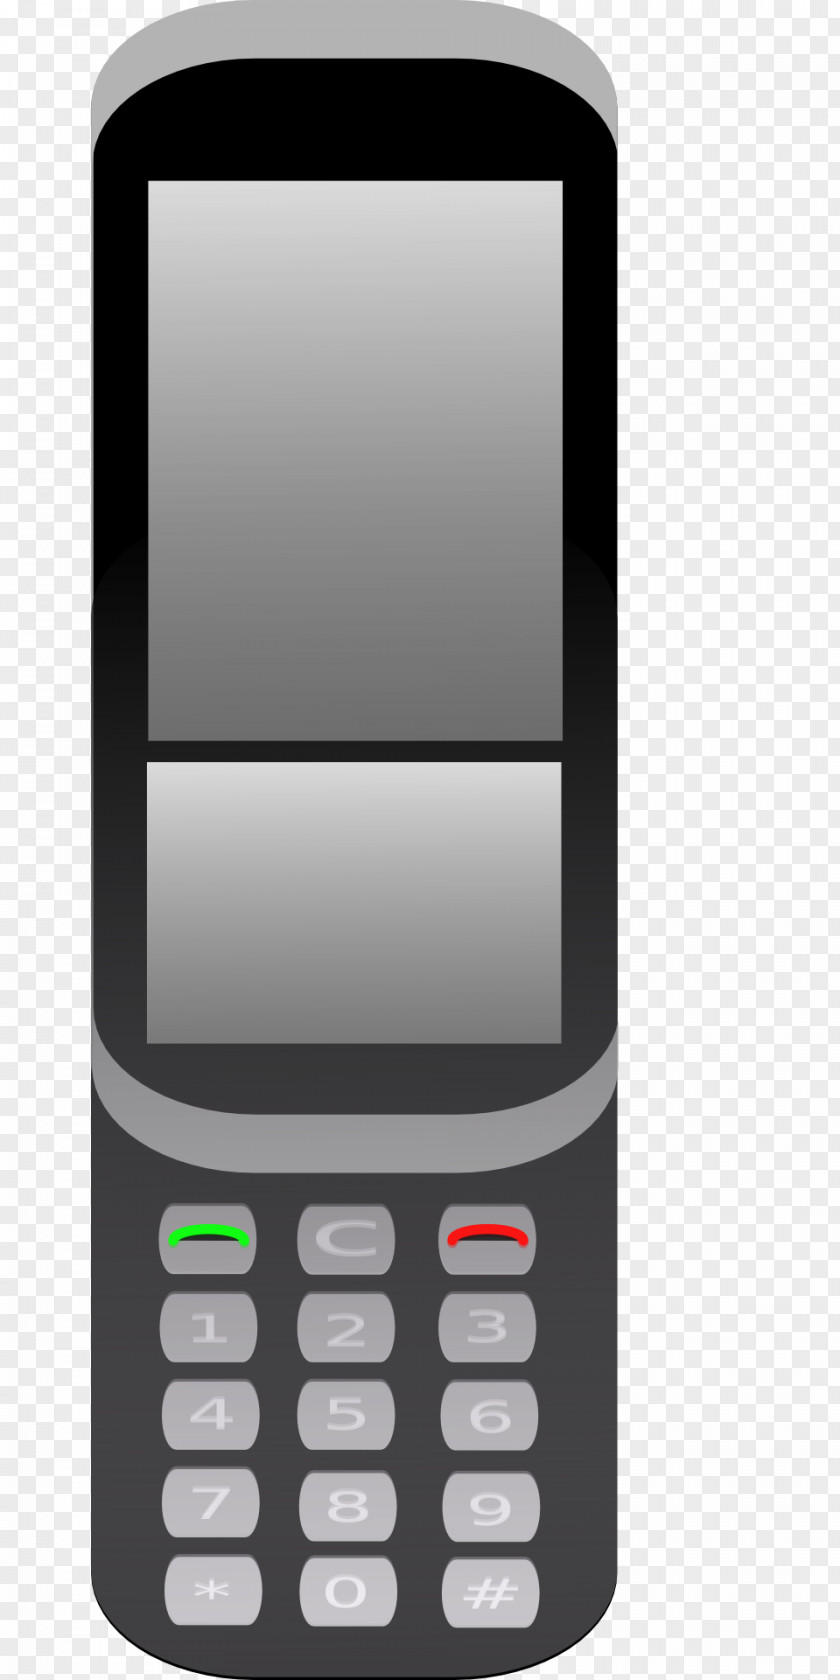 Mobile Phone IPhone Telephone Nokia Clip Art PNG